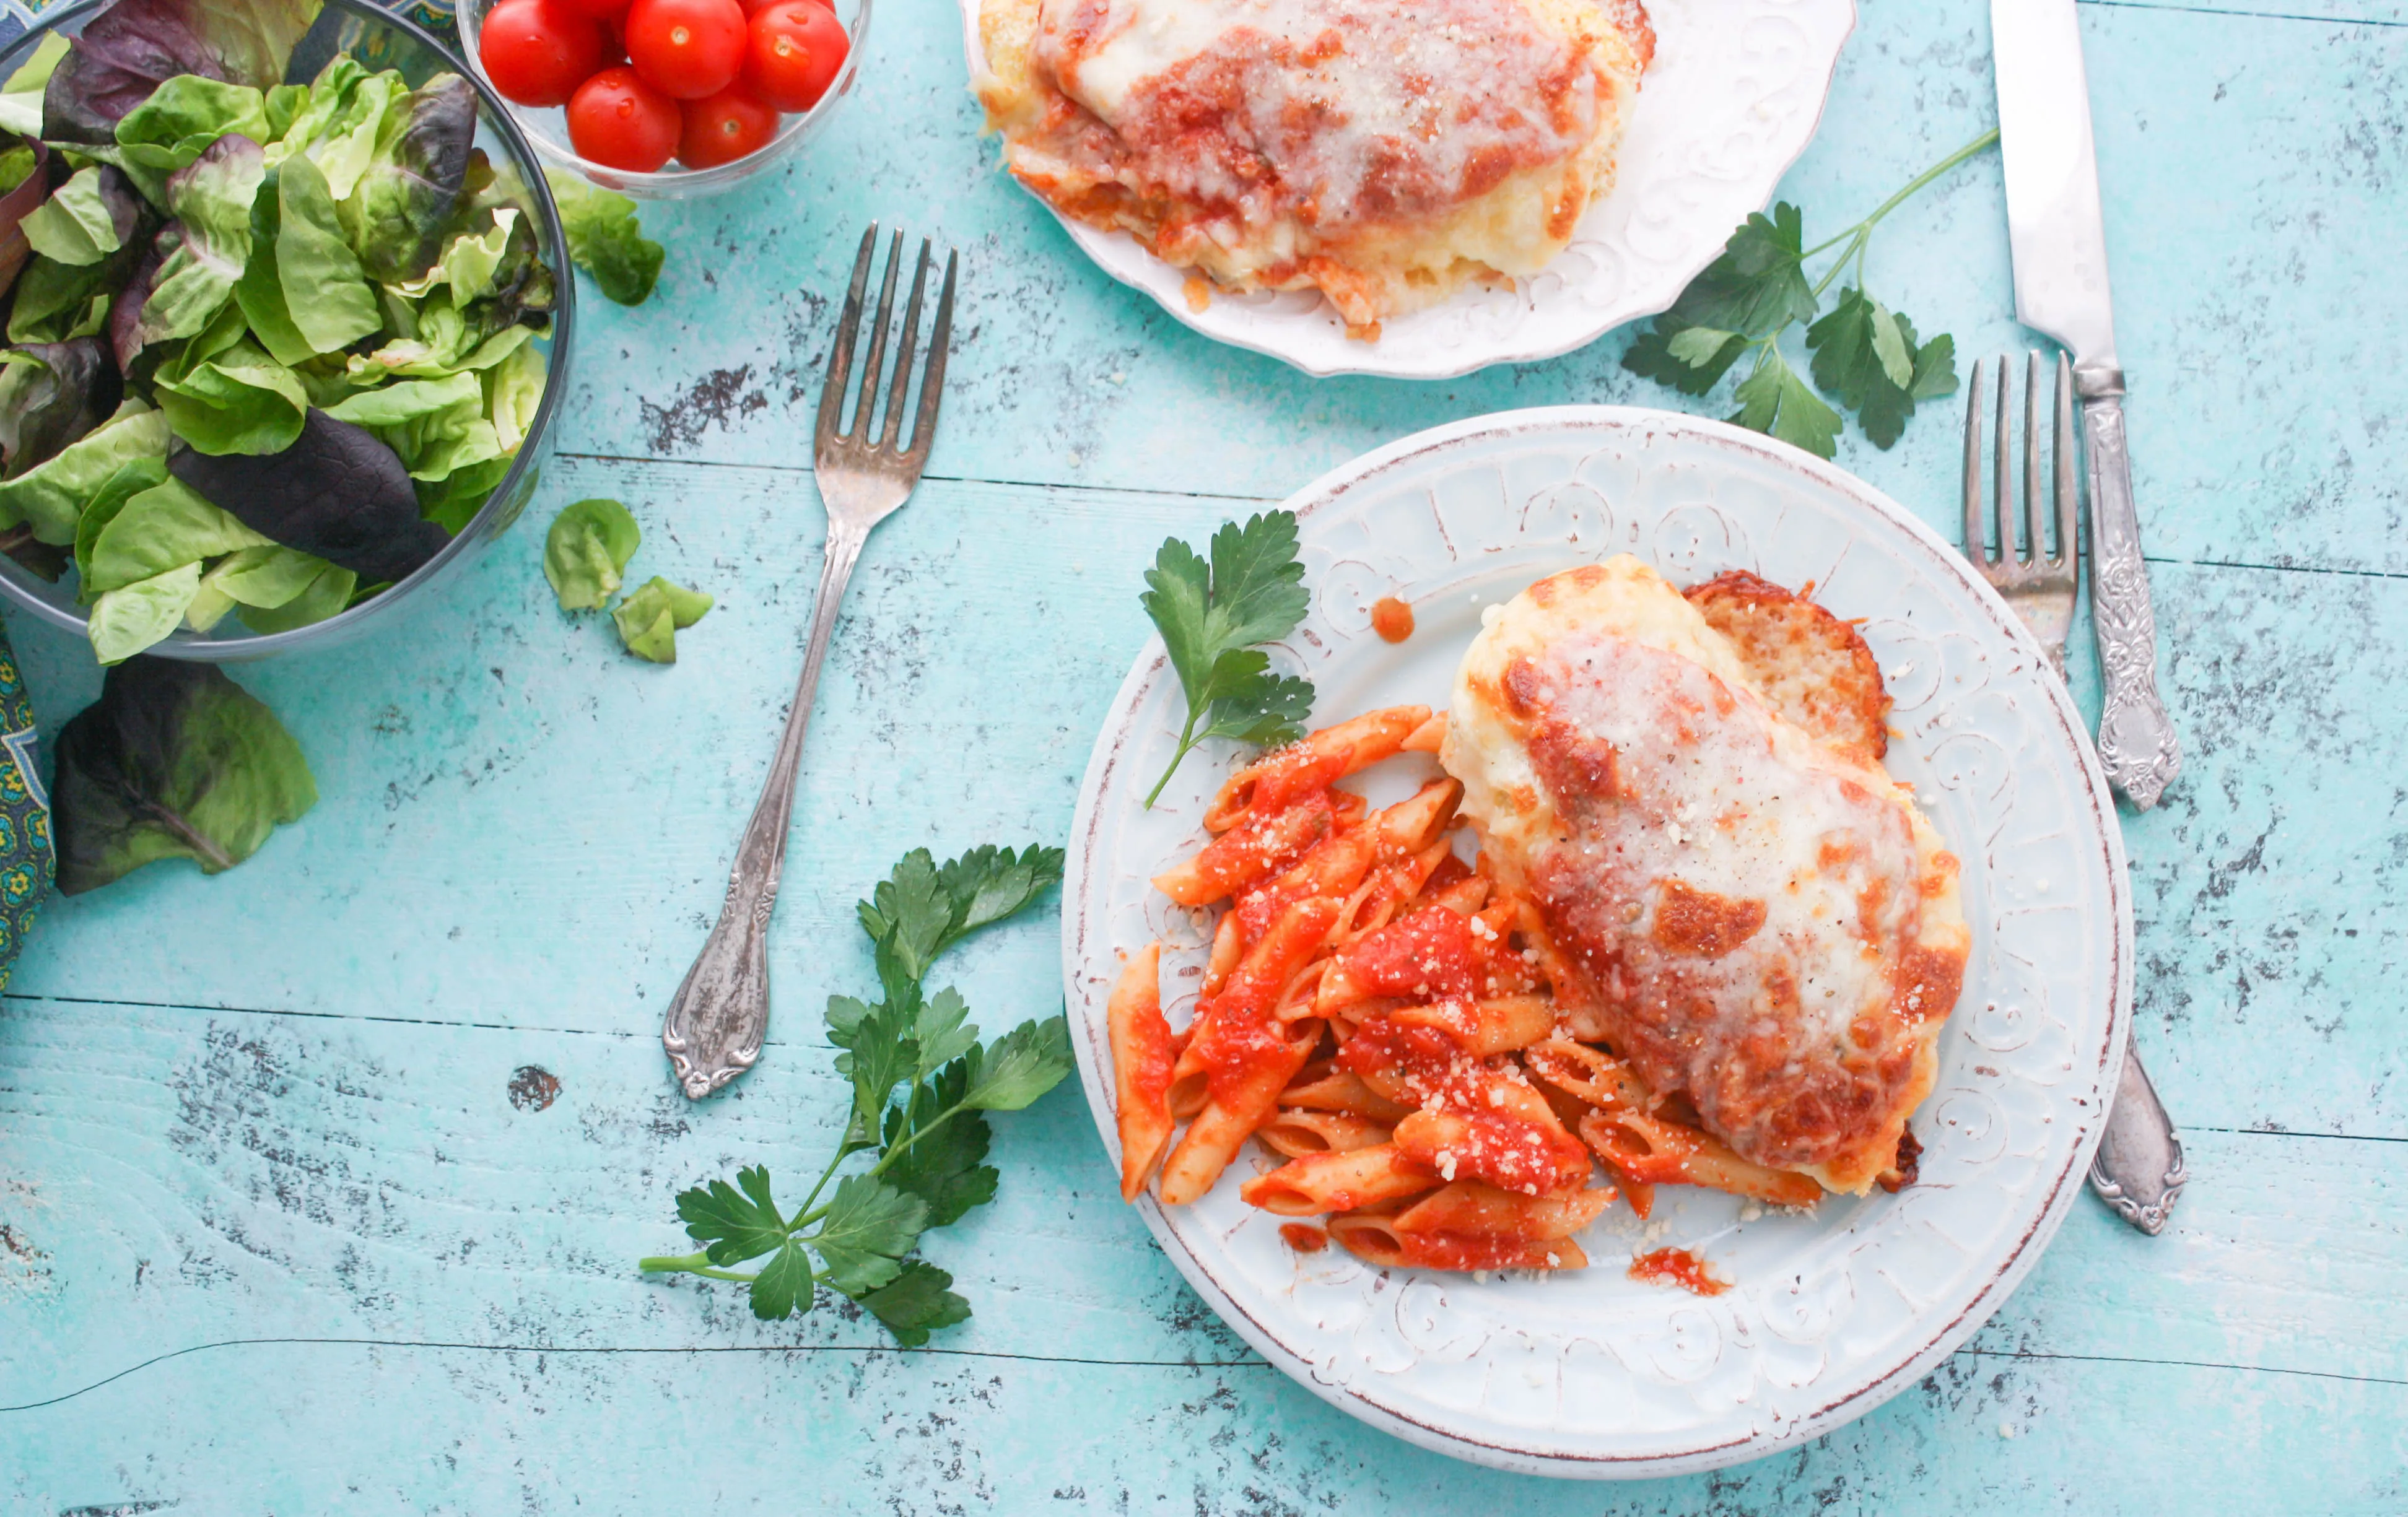 Classic Baked Chicken Parmesan is a great dish for any meal. Enjoy Classic Baked Chicken Parmesan any night of the week.